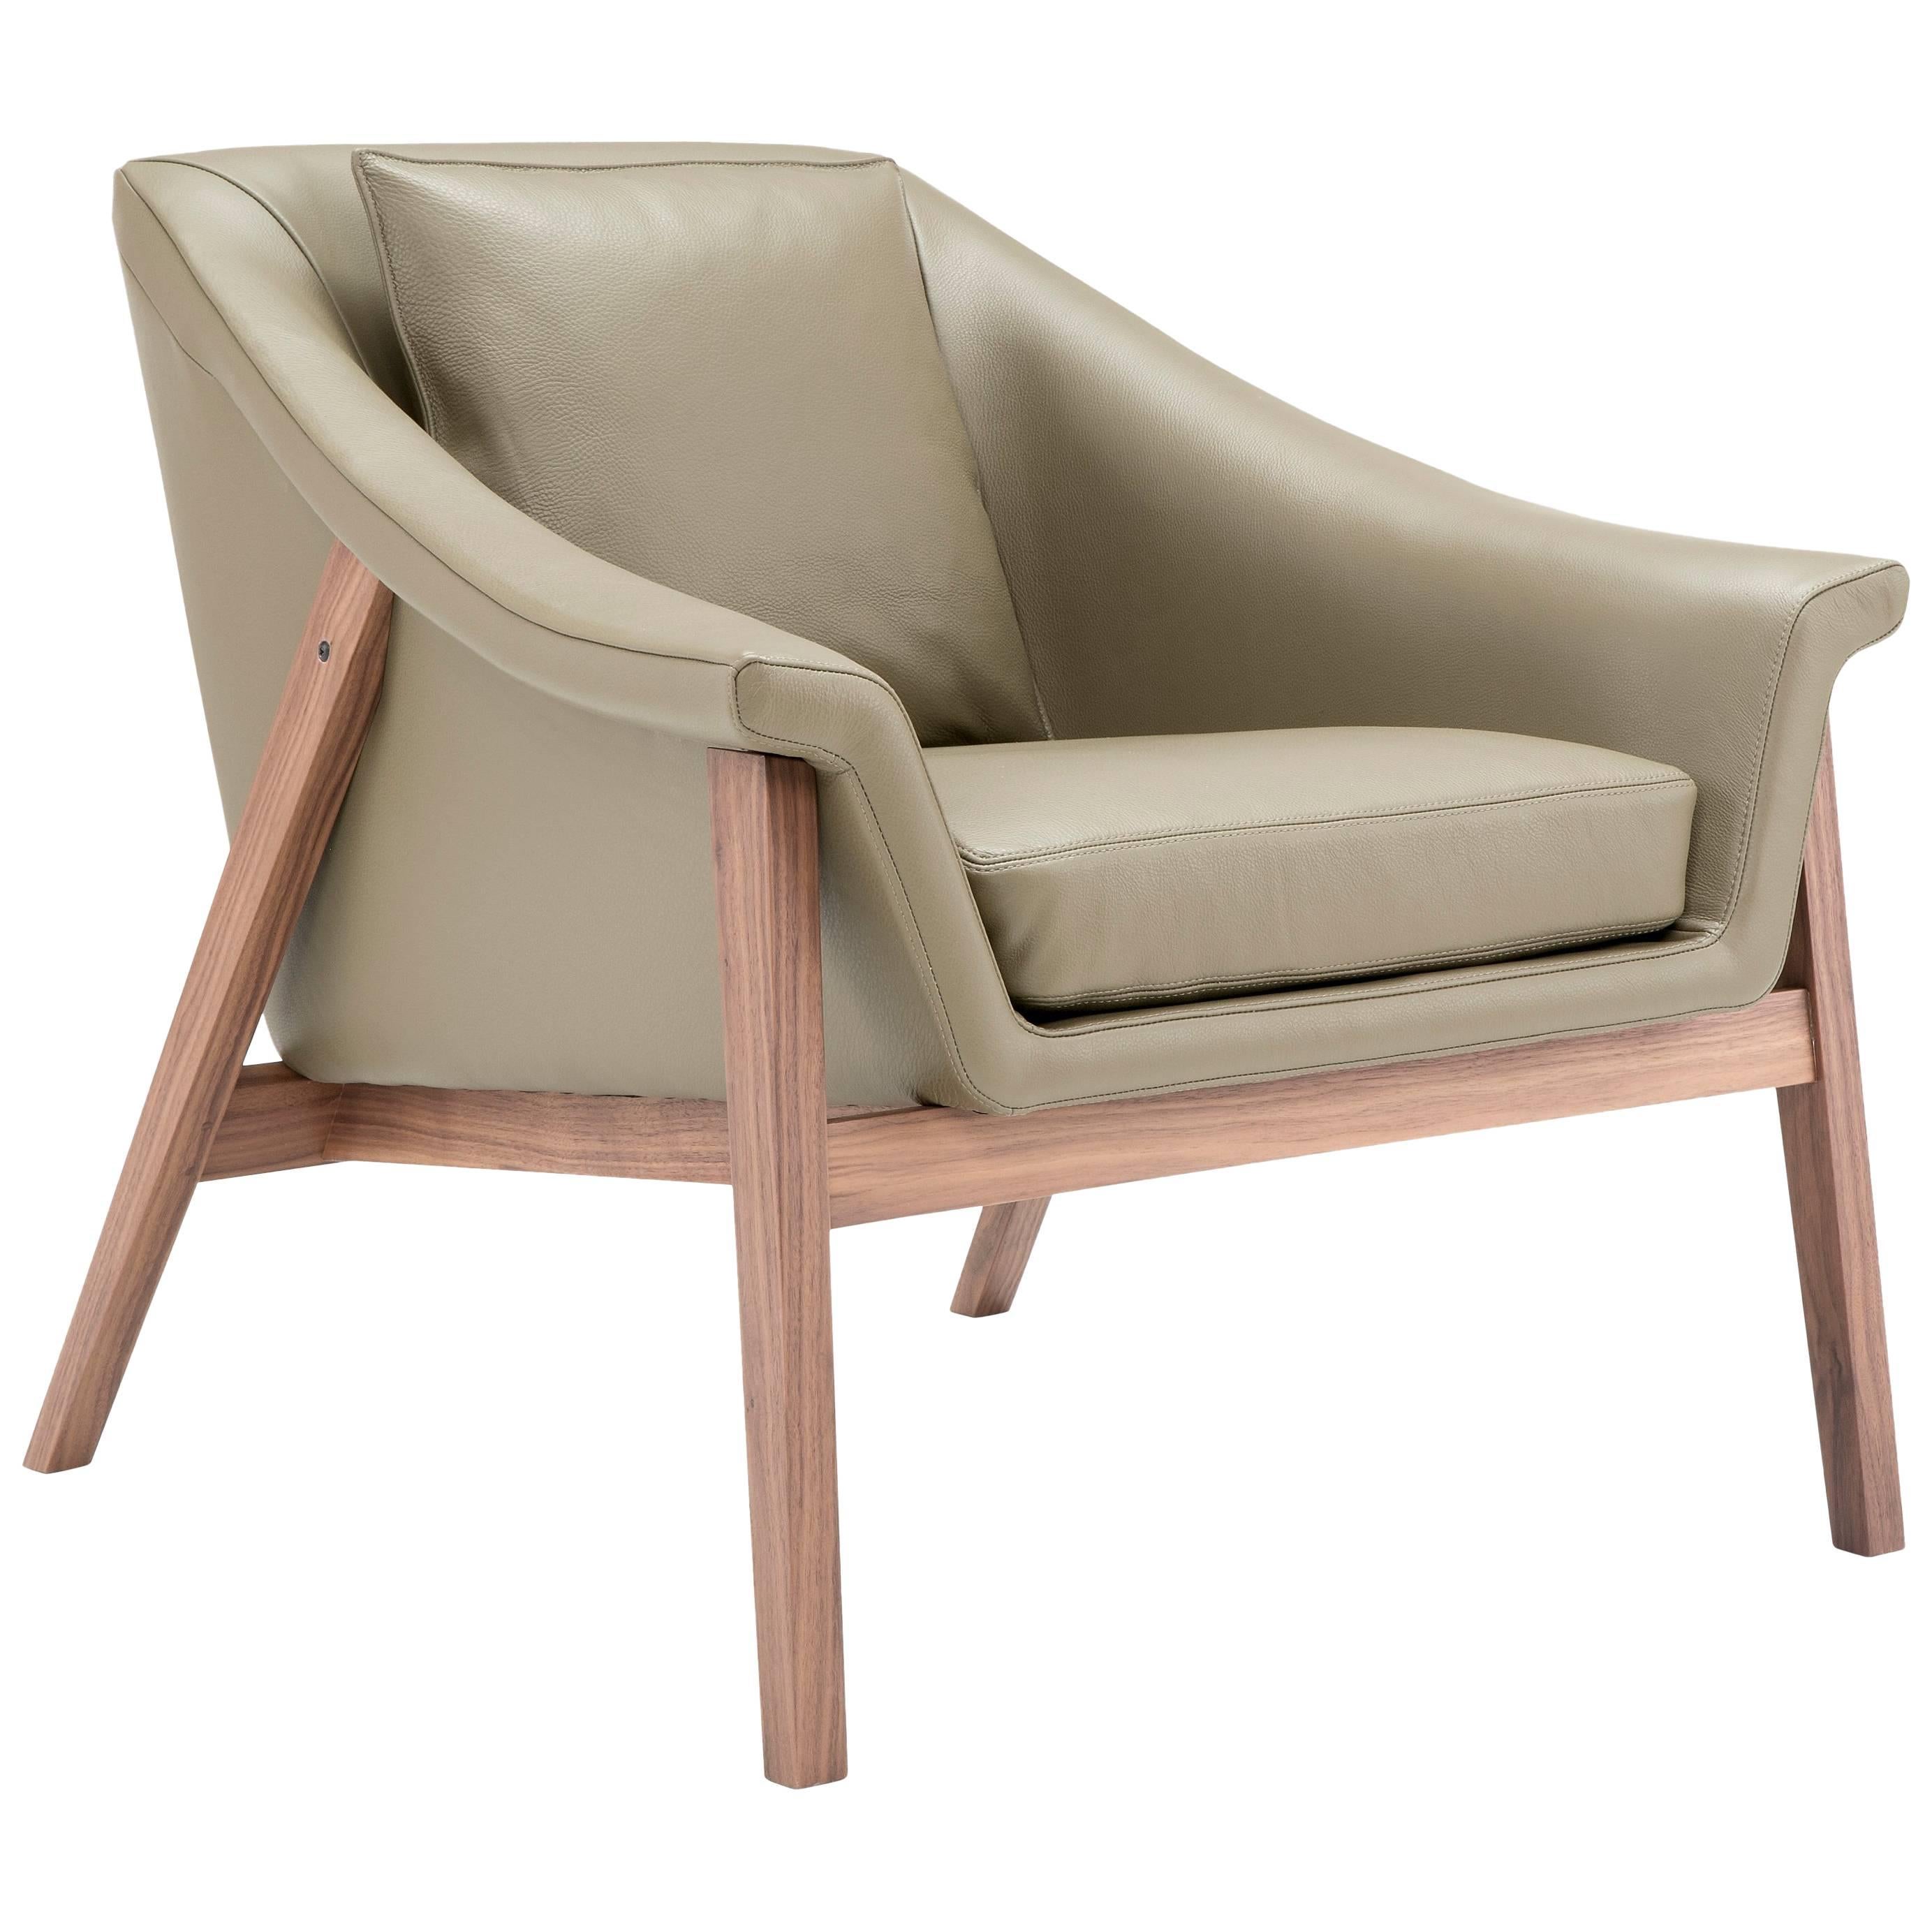 Gaia Armchair in Taupe by Maurizio Marconato & Terry Zappa For Sale